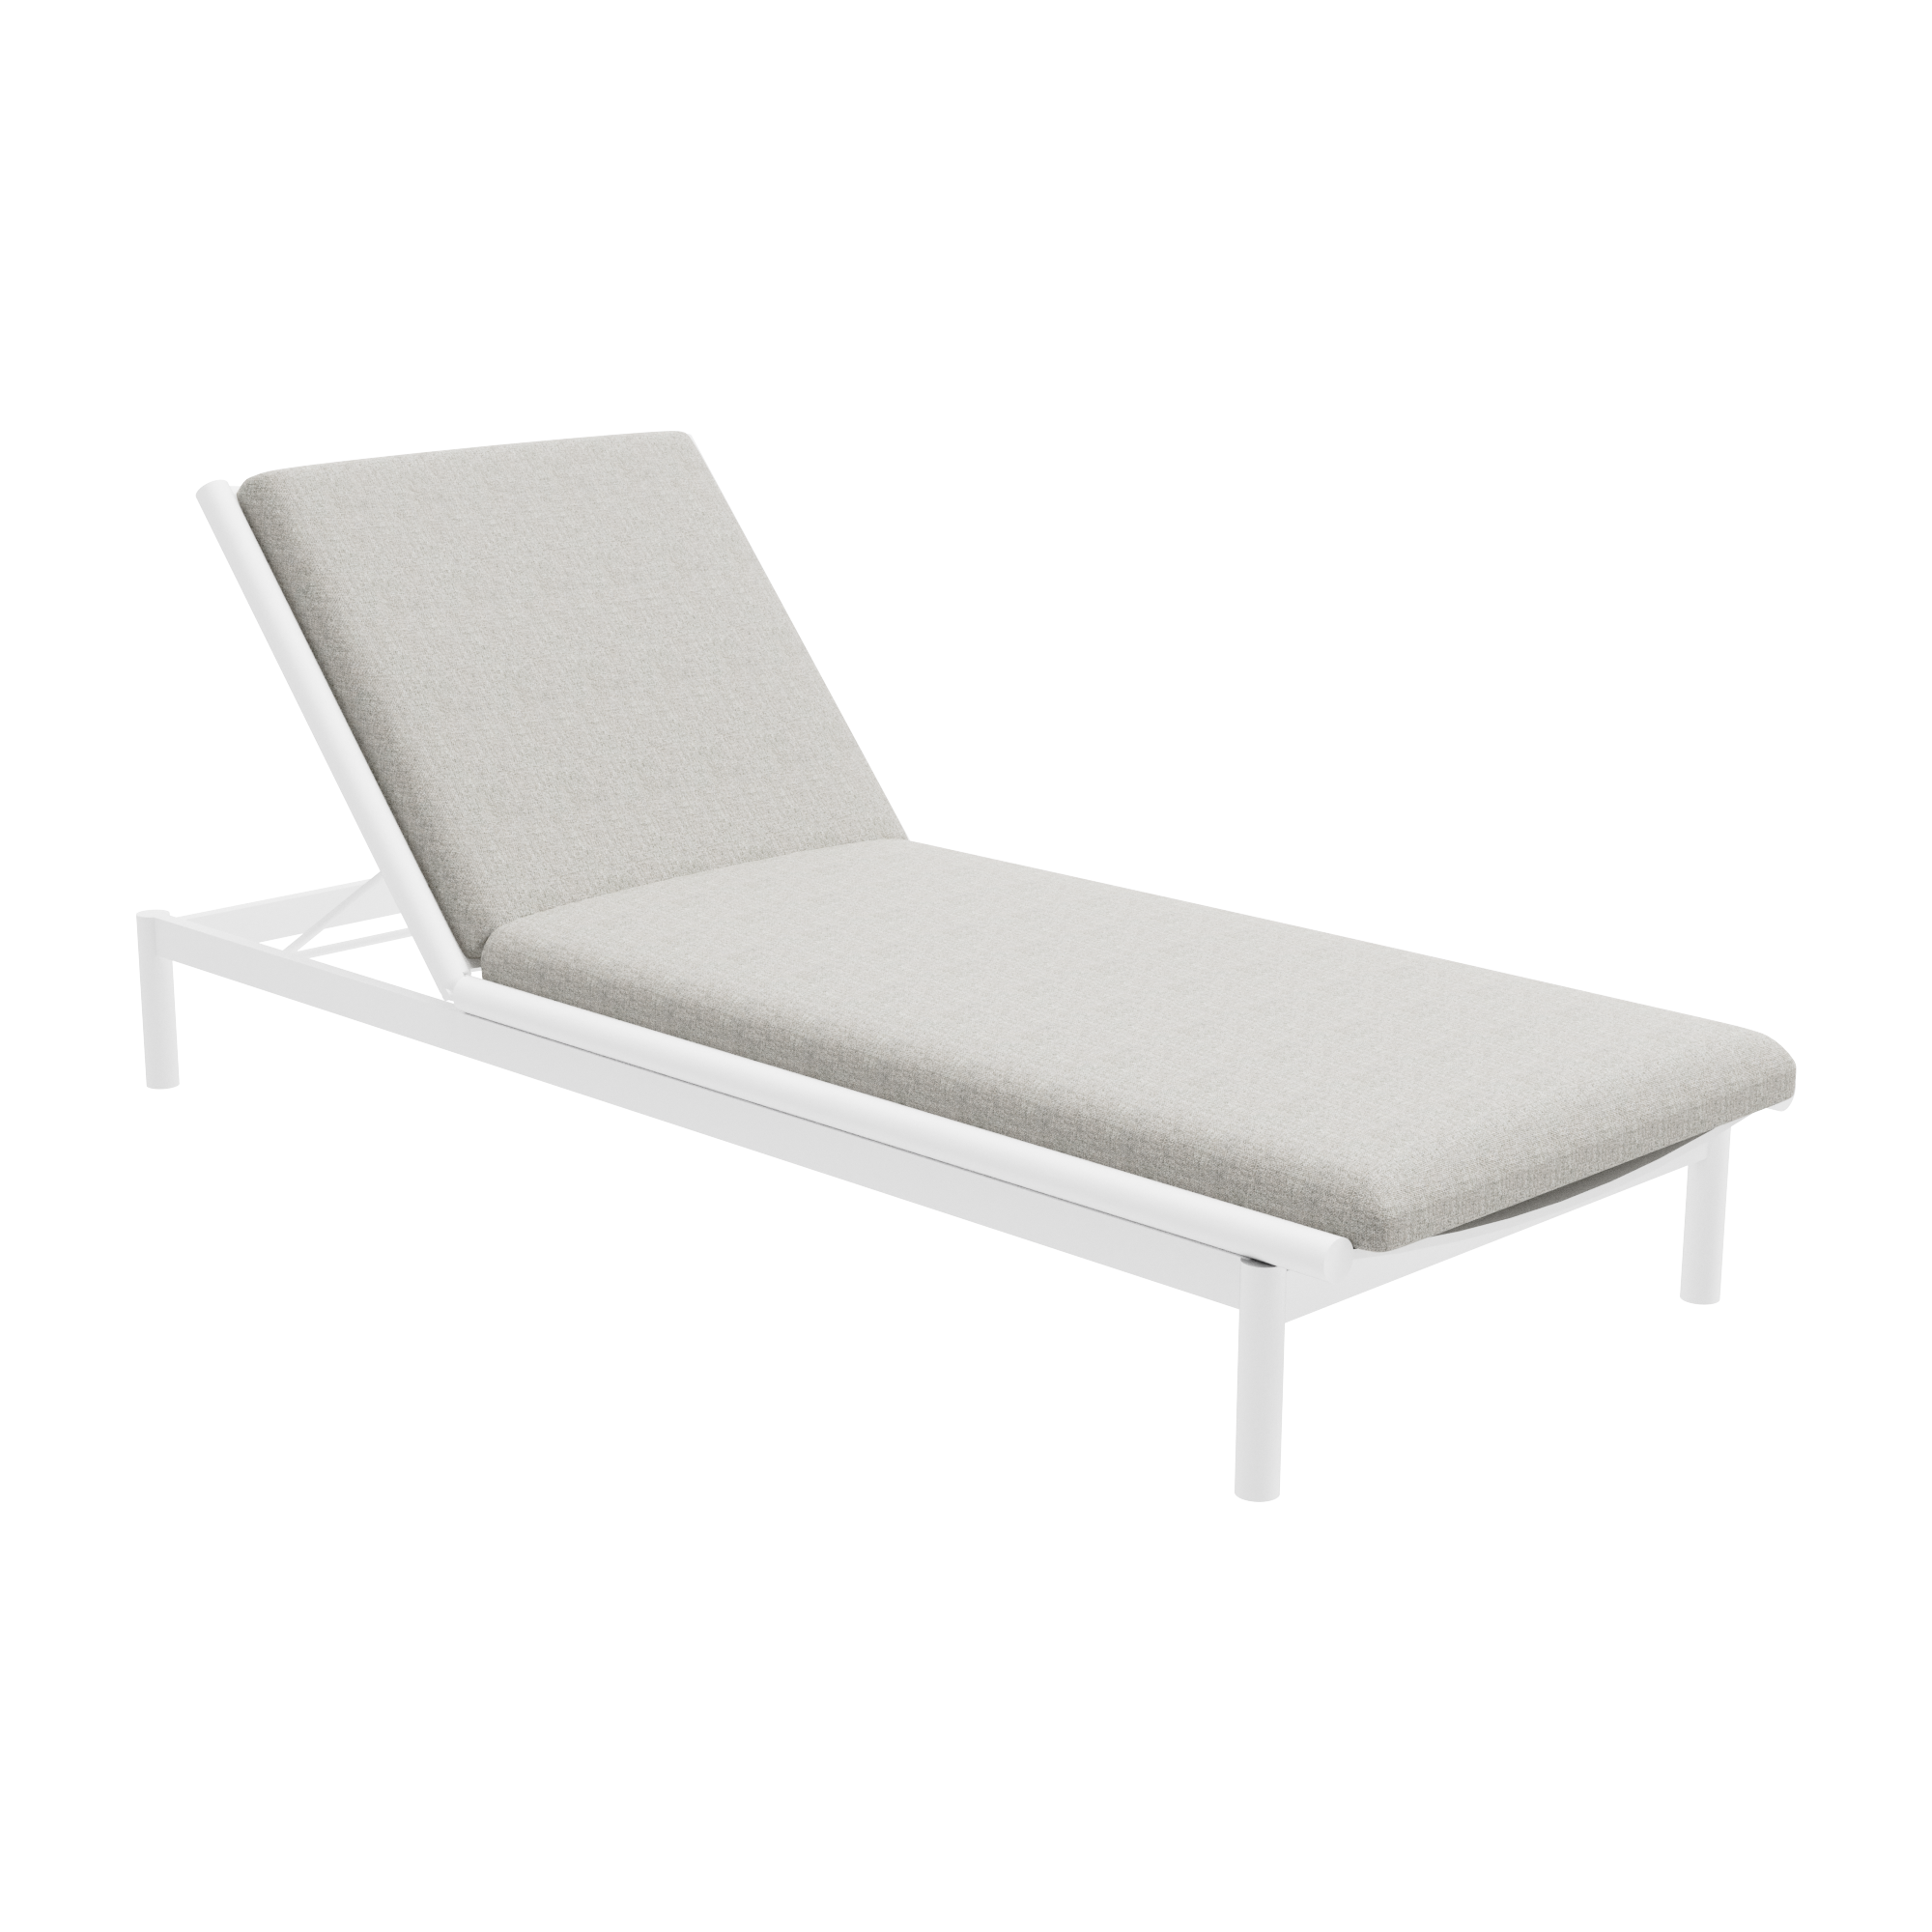 OVIEADO SUNLOUNGER WITHOUT ARM